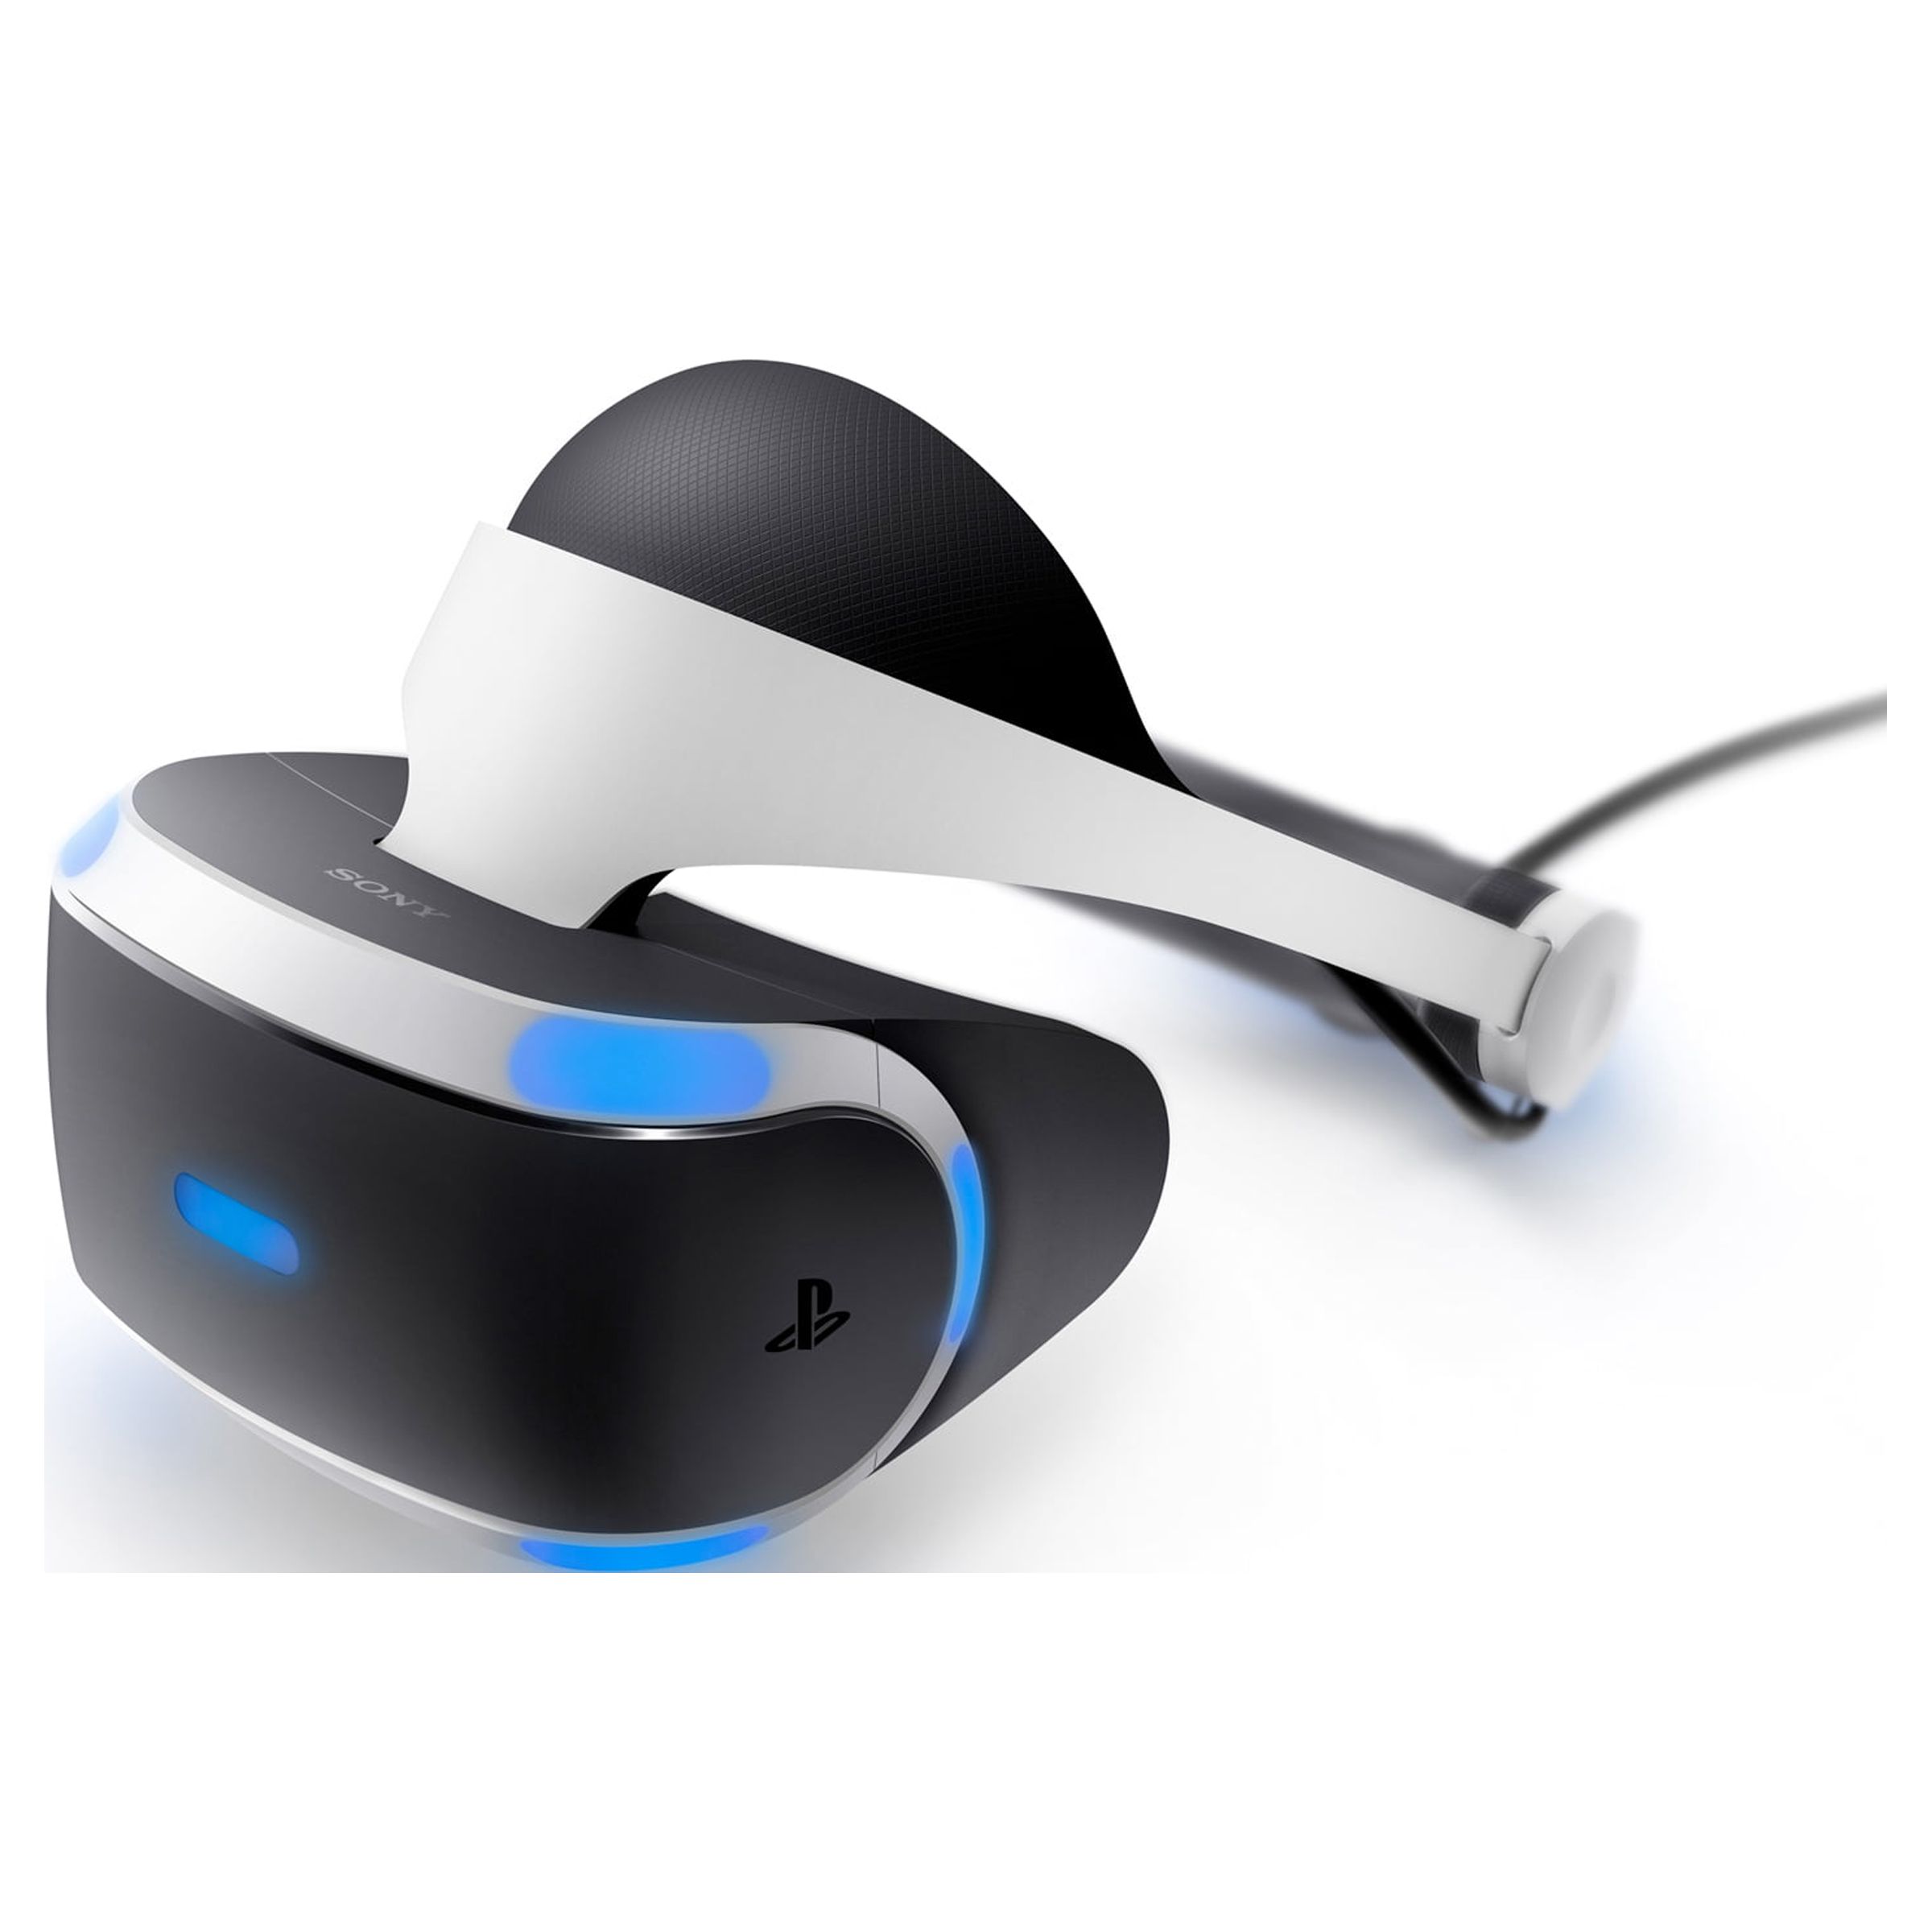 Sony PlayStation VR Headset, 3001560 - image 1 of 5